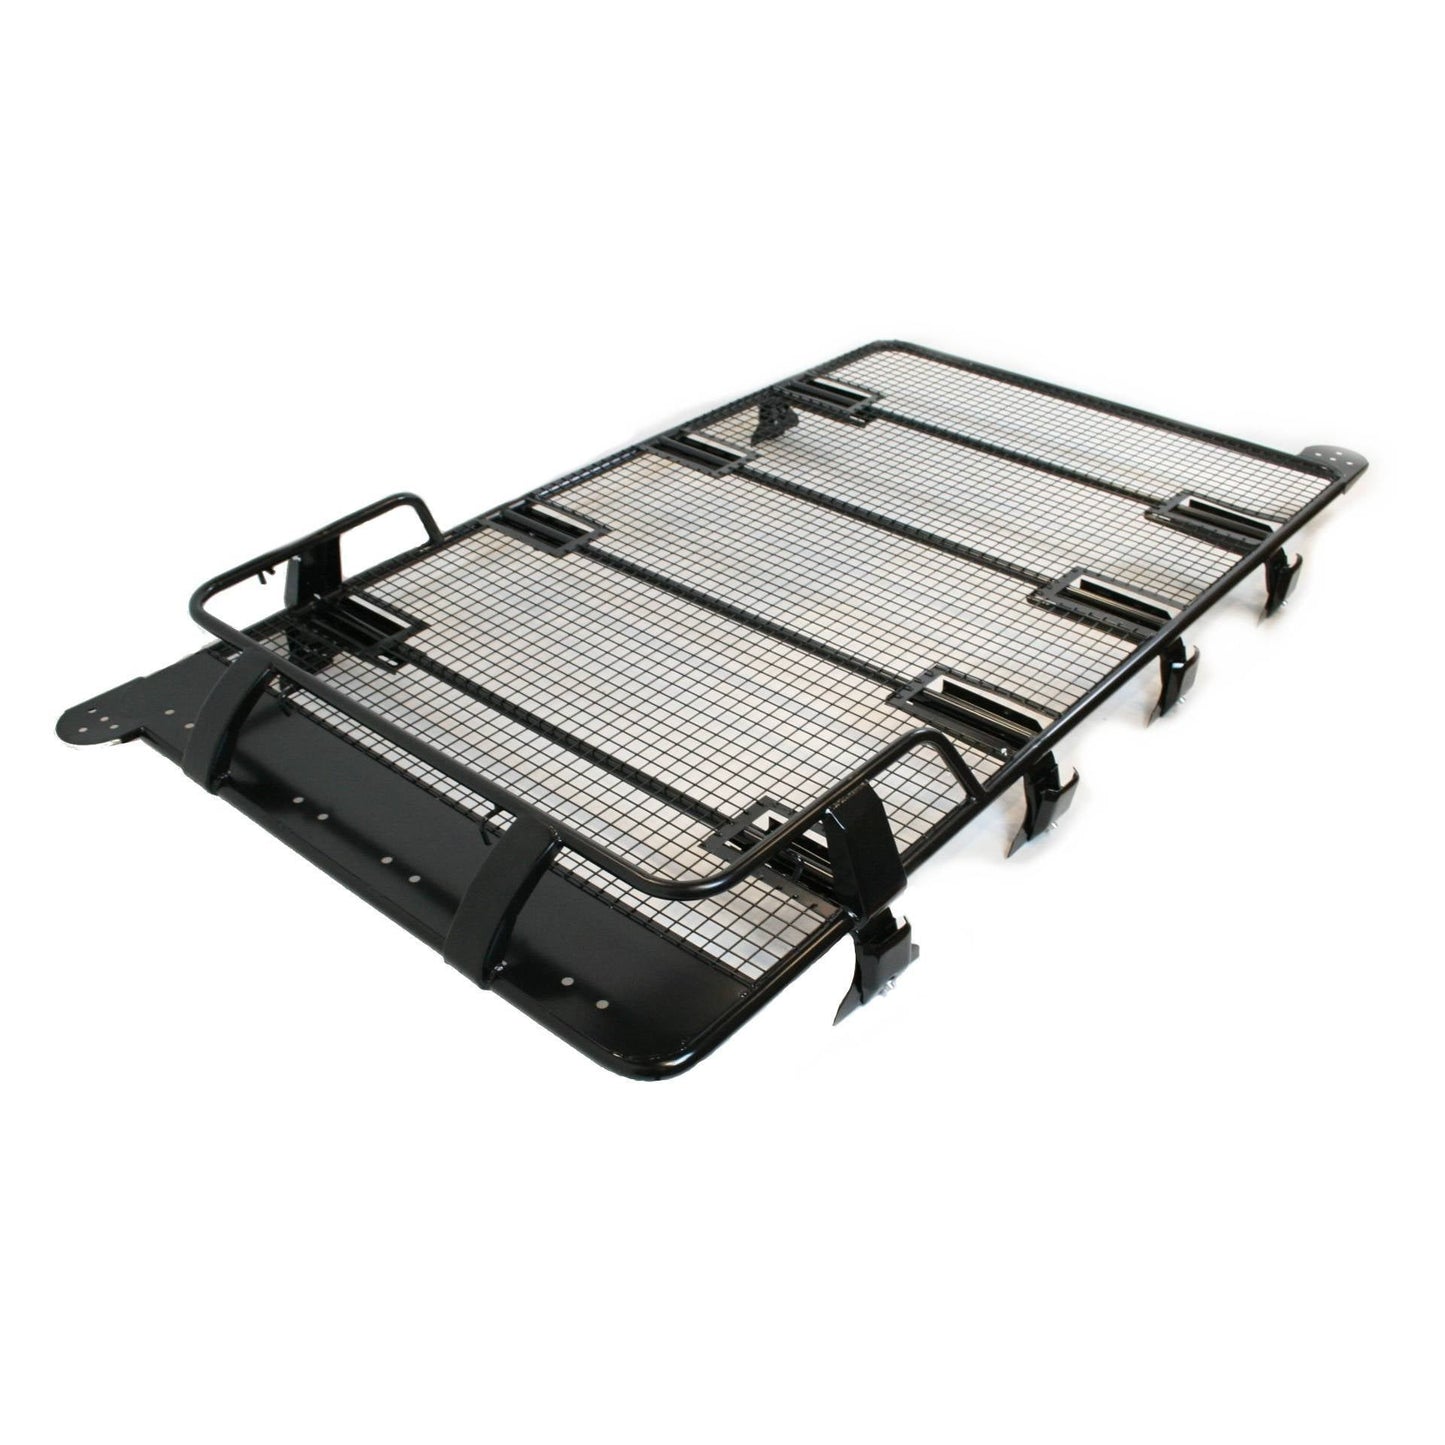 Expedition Steel Front Basket Roof Rack for Jeep Cherokee XJ 1983-2001